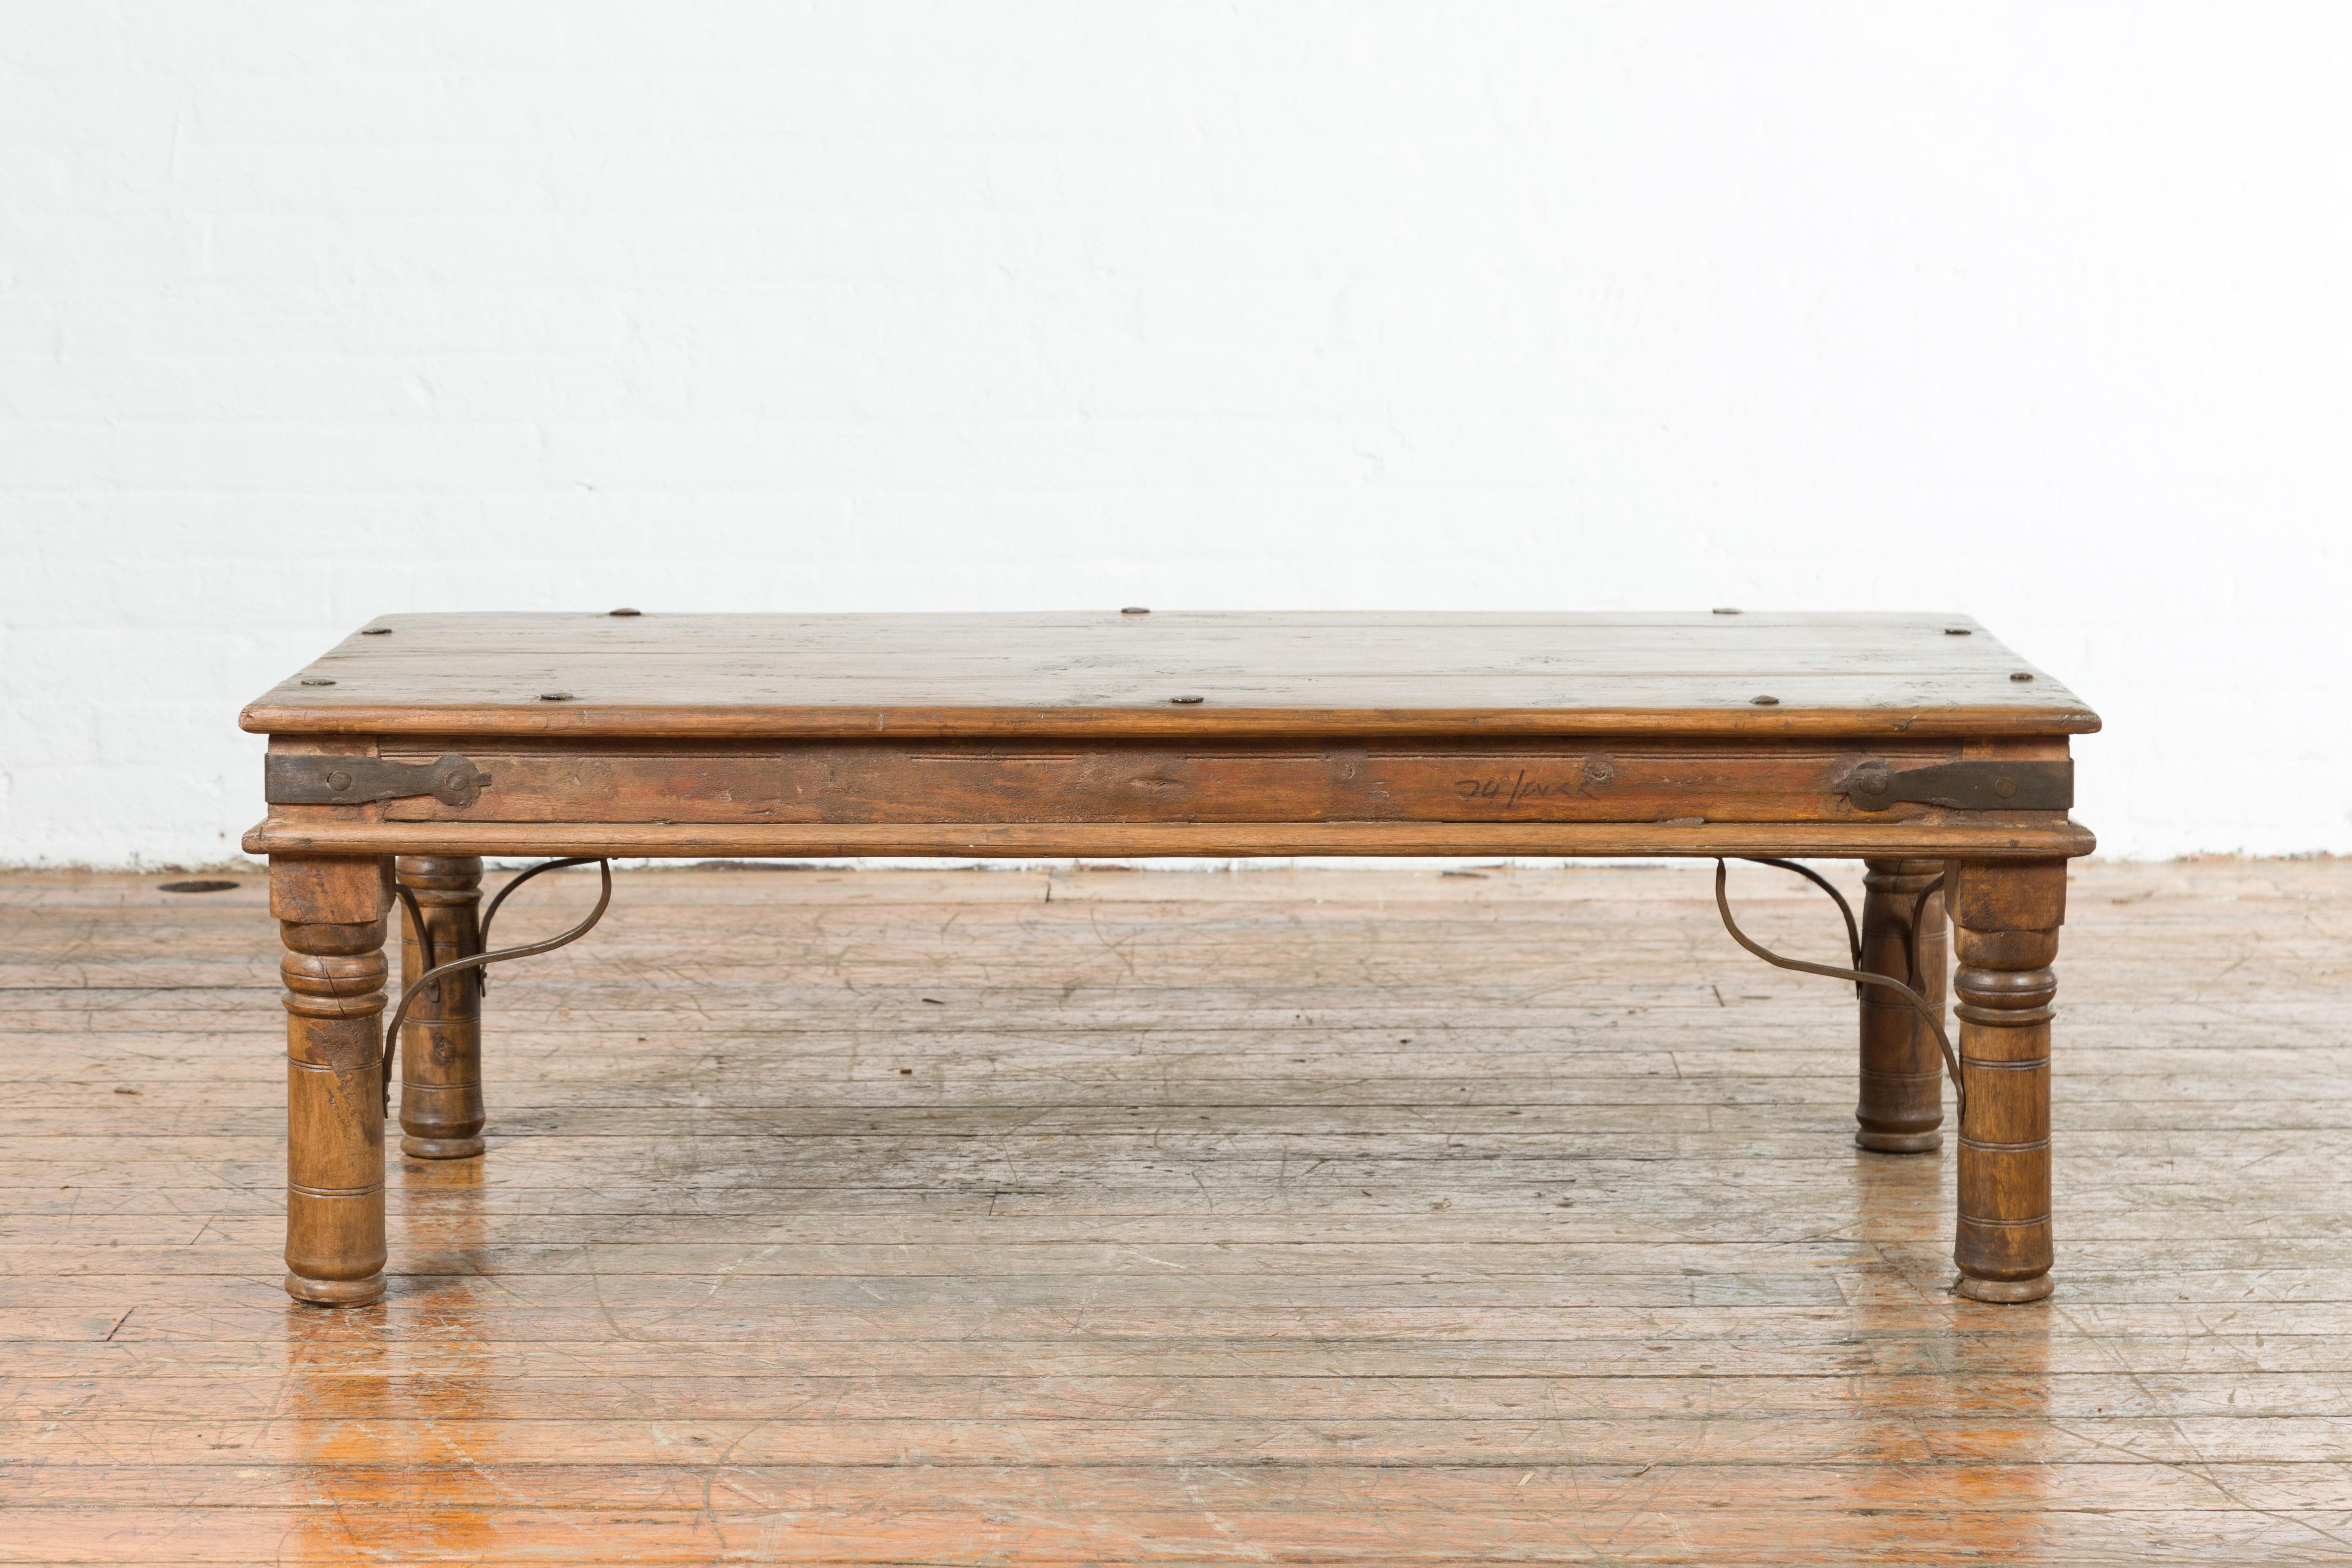 19th Century Rustic Indian Coffee Table with Painted Apron and Iron Accents 10